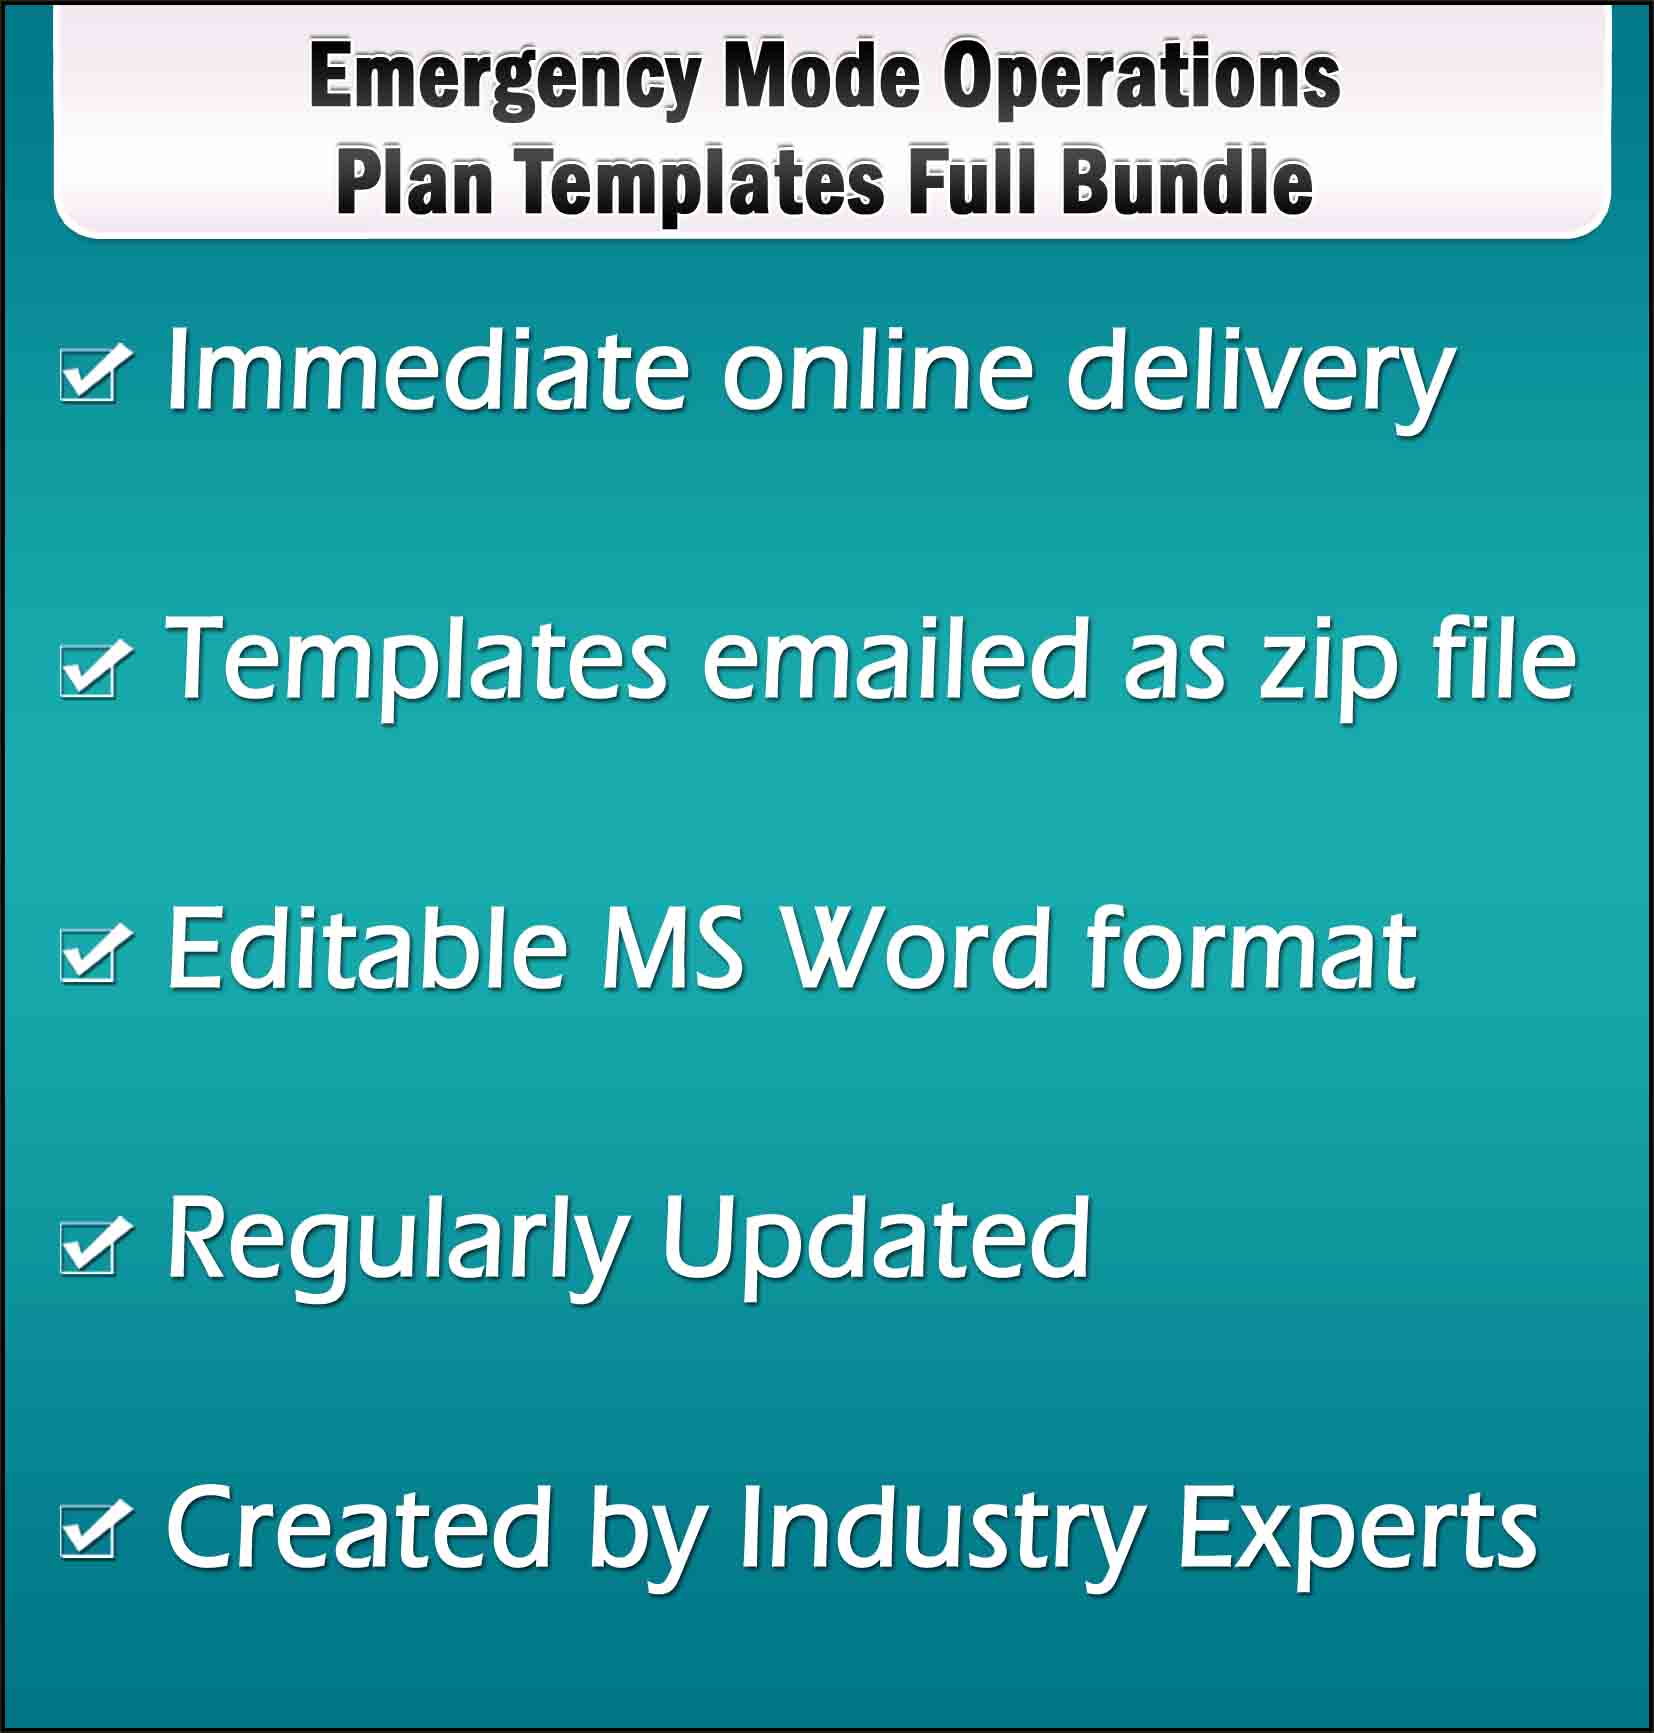 Emergency Mode Operations Plan Templates